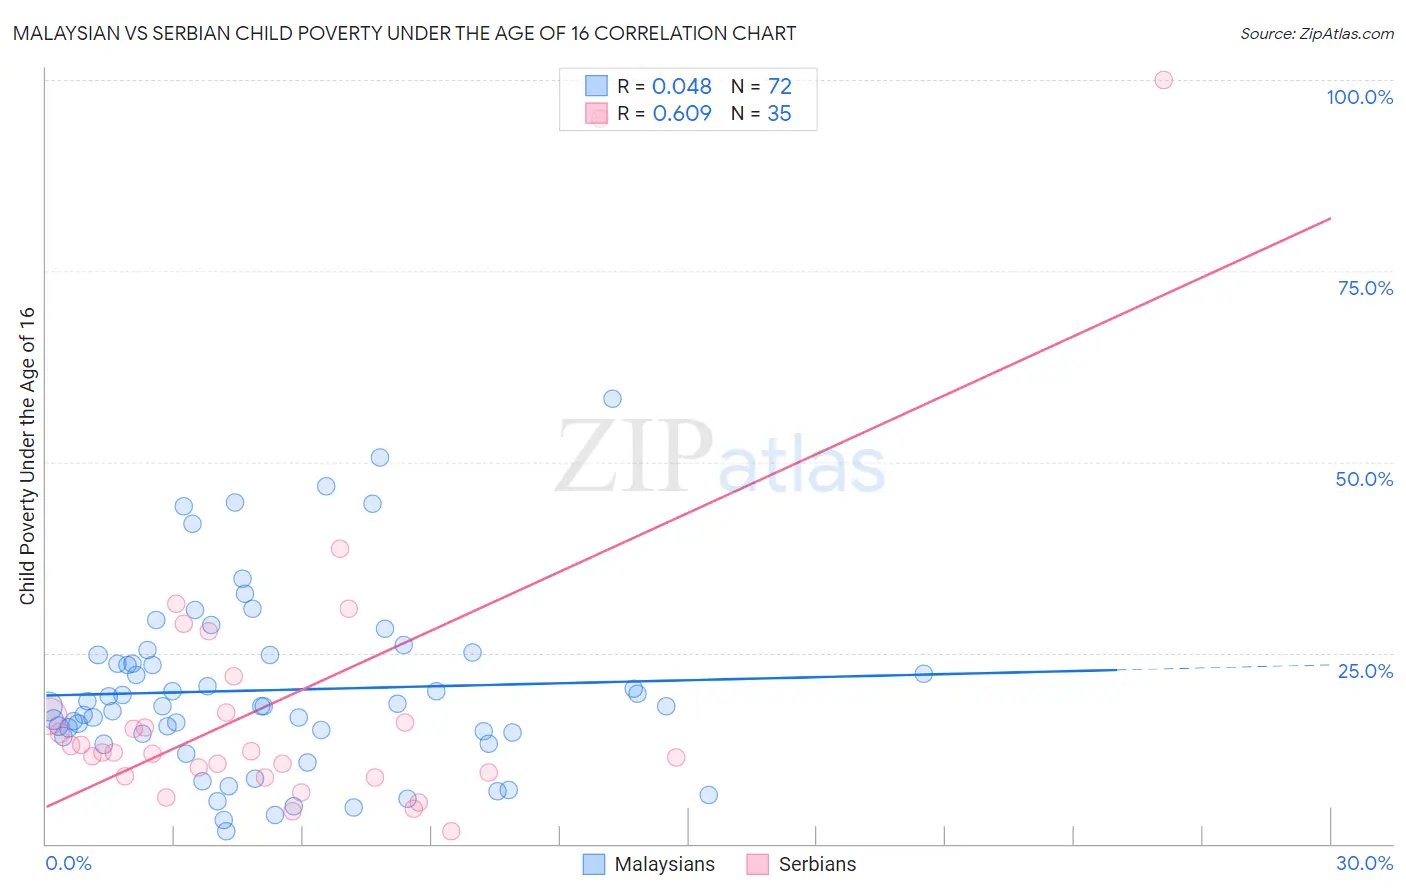 Malaysian vs Serbian Child Poverty Under the Age of 16